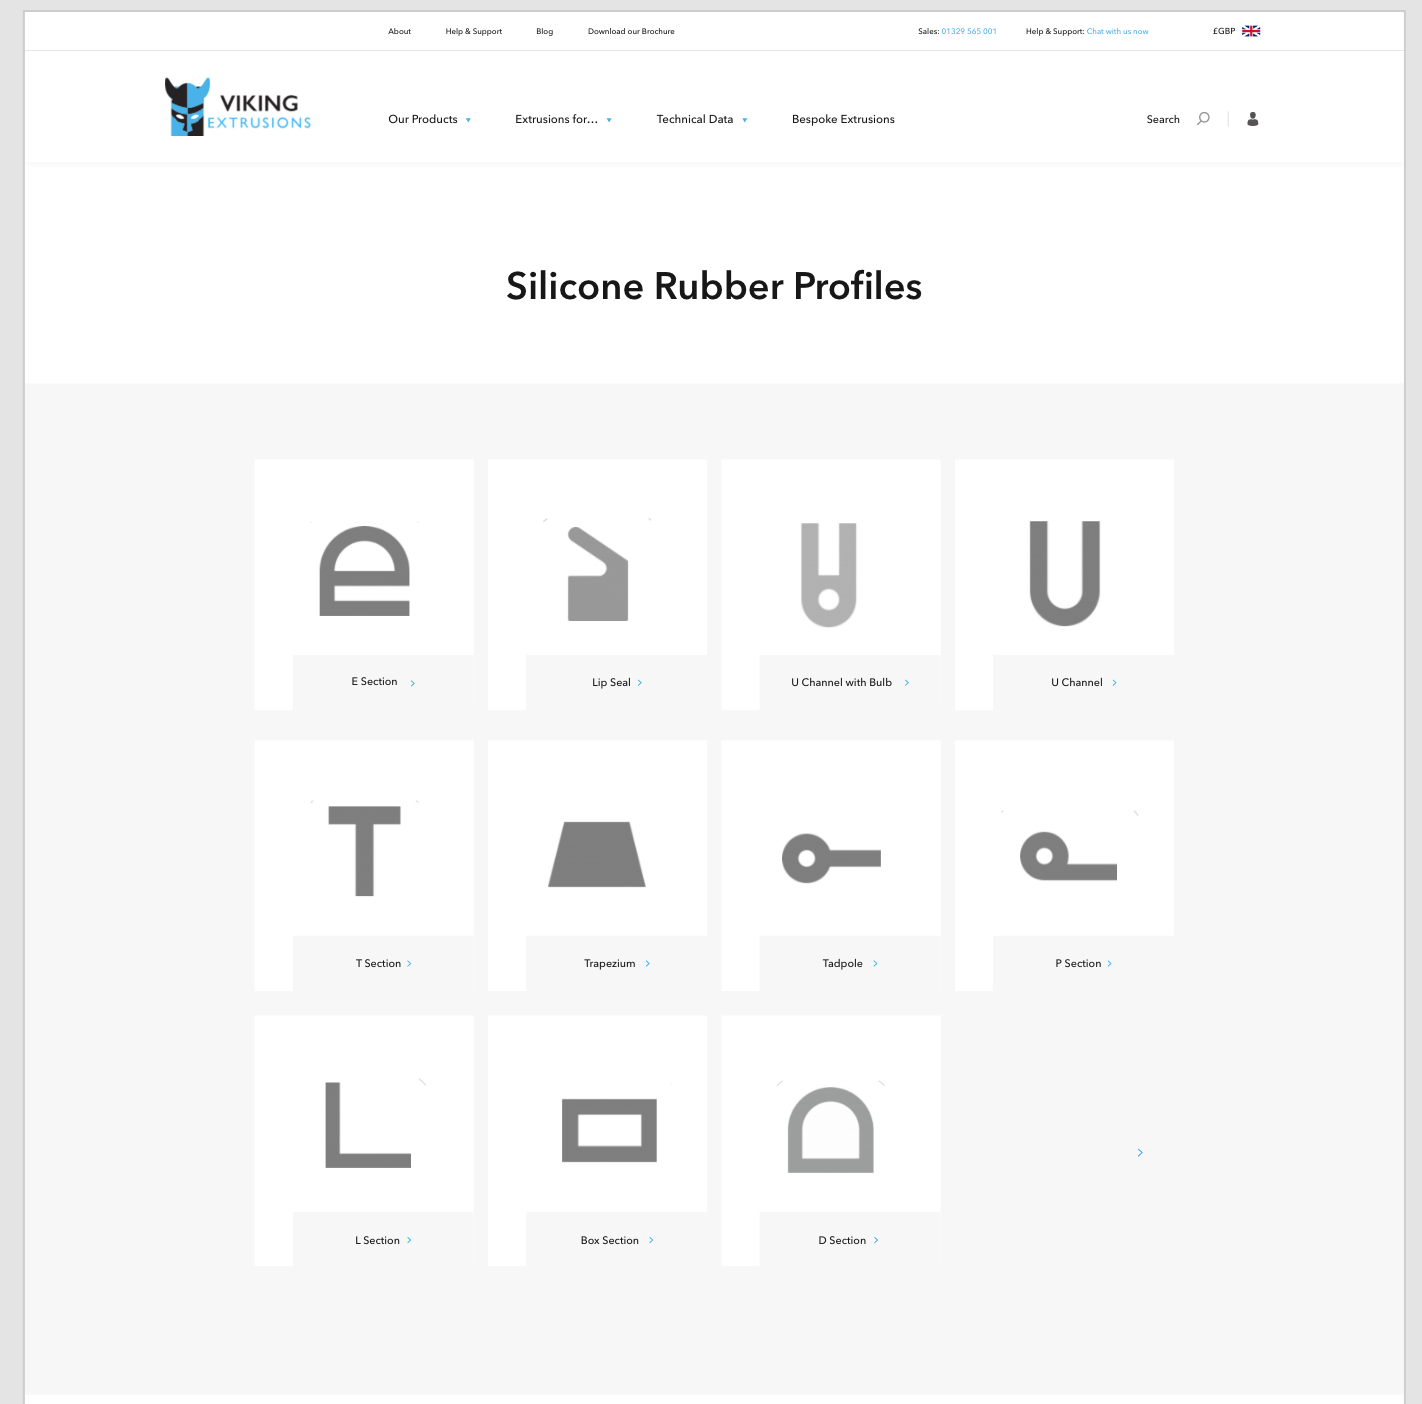 A page on Viking Extrusions' website focused on Silicone Rubber Profiles.